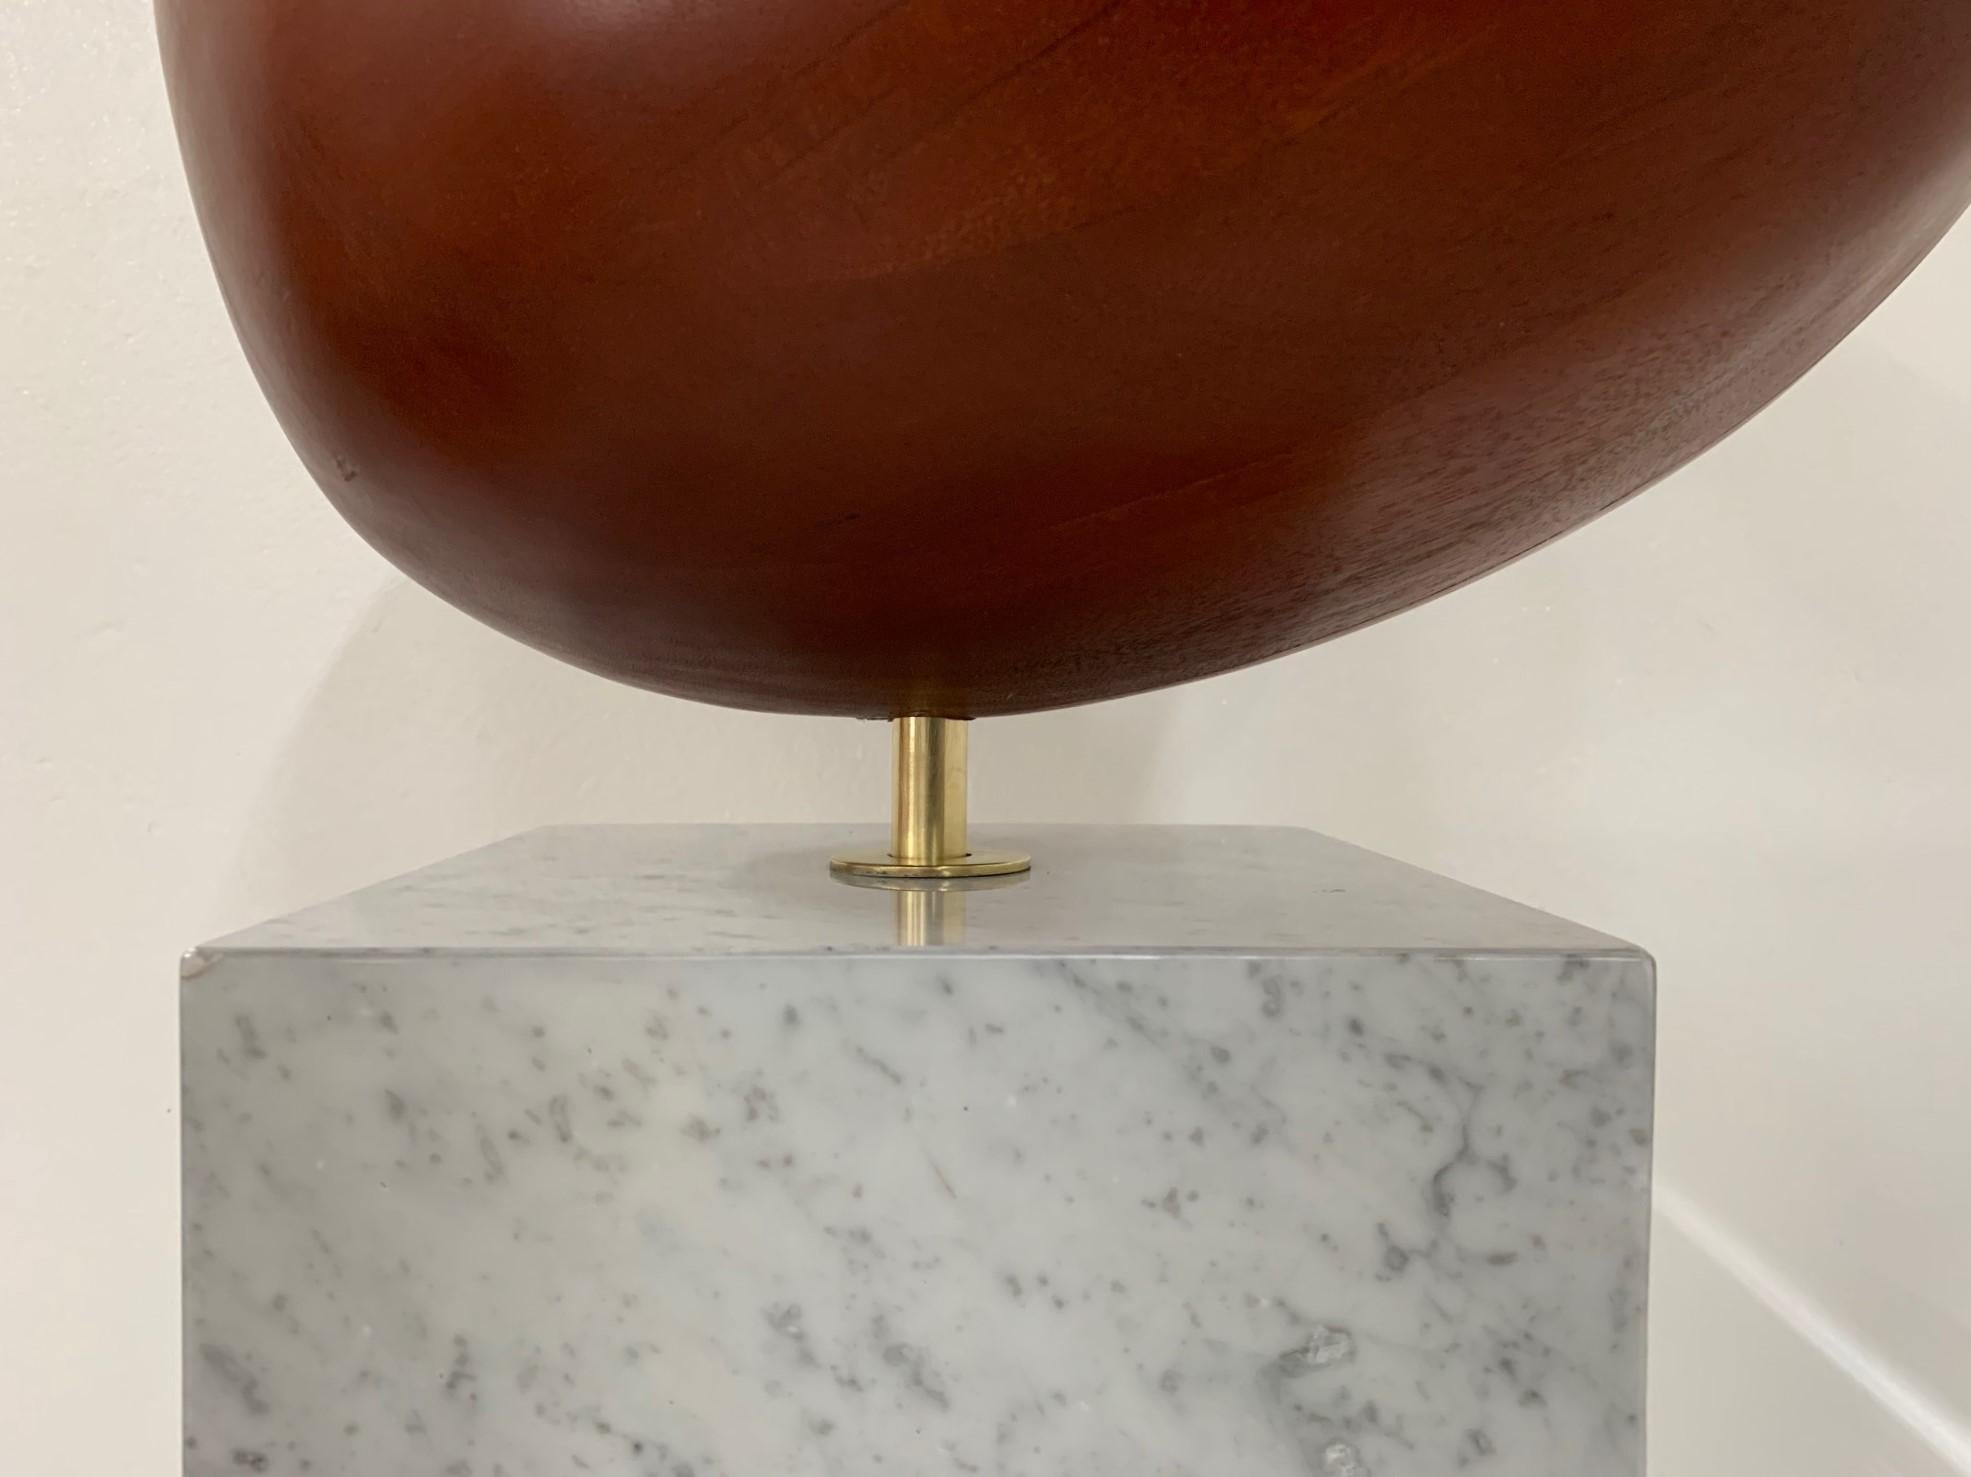 Large-Scale Teak Apple Sculpture on Carrara Marble Pedestal In Good Condition For Sale In New York, NY